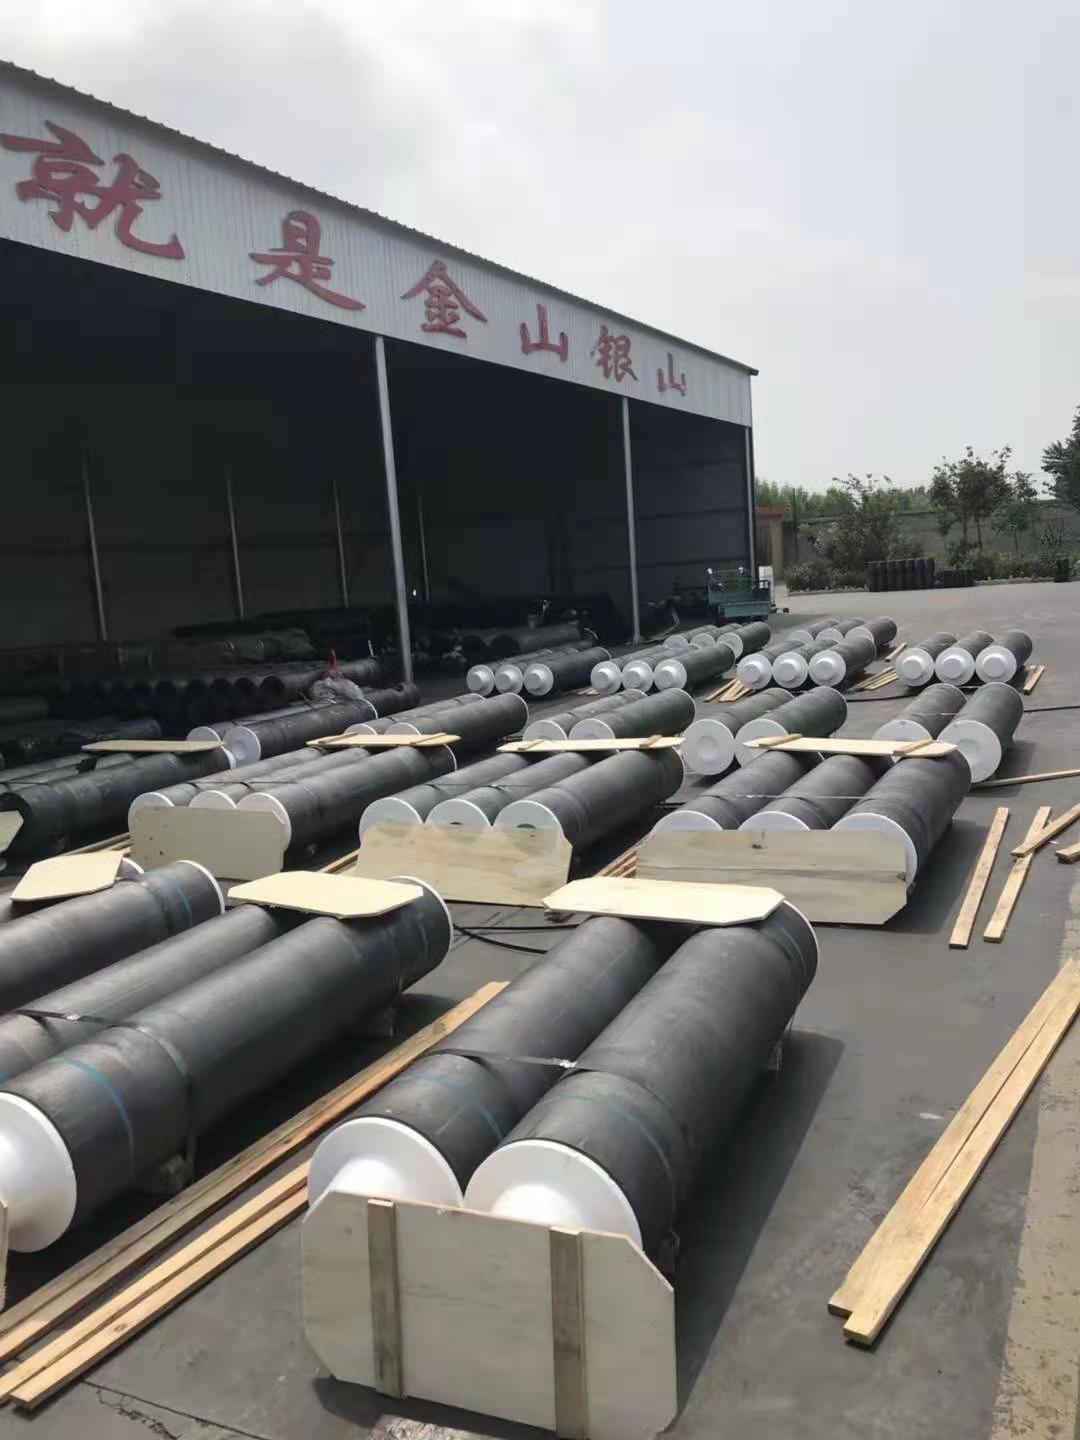 Product name : UHP 500mm Graphite Electrode for Steel Production       Basic Info.      Model NO.  Graphite Electrode  Shape  Cylinder  Material  Graphite  Color  Black  Size  Customizable  Place of O